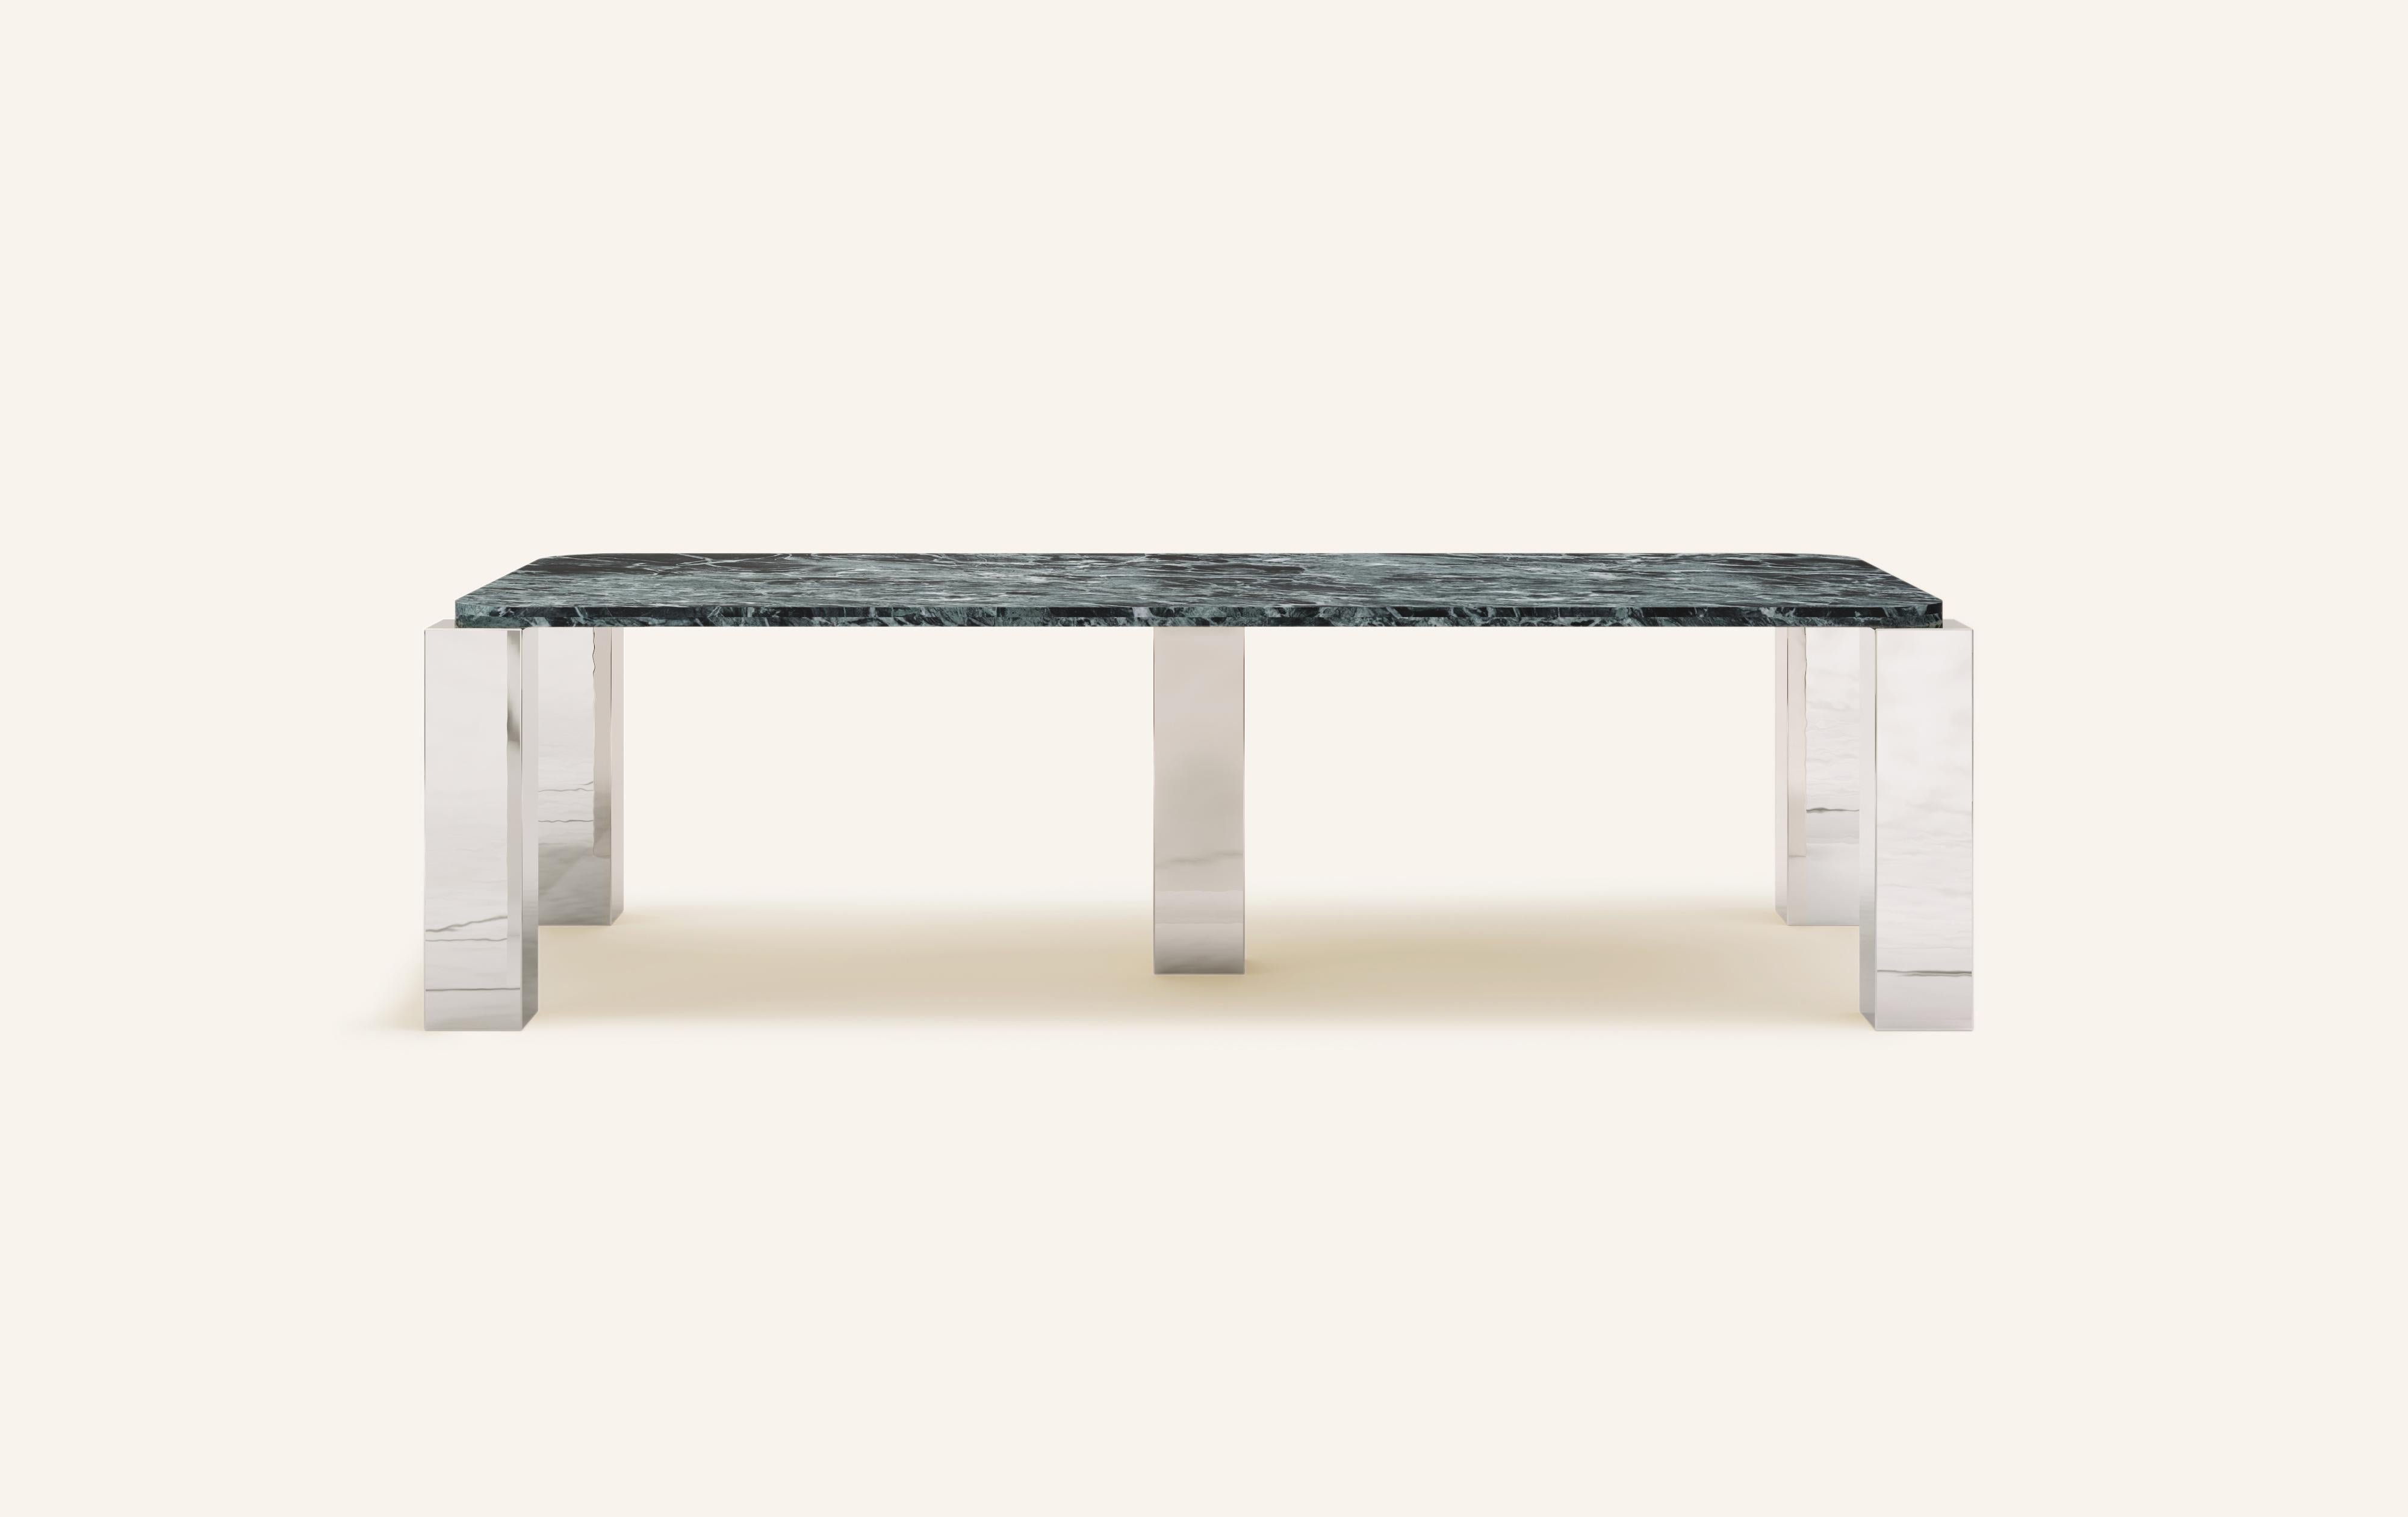 MONOLITHIC FORMS SOFTENED BY GENTLE EDGES. WITH ITS BOLD MARBLE PATTERNS CUBO IS AS VERSATILE AS IT IS STRIKING.

DIMENSIONS:
110”L x 50”W x 30”H: 
- 108”L x 48”W x 1.5” THICK TABLETOP WITH WITH 6